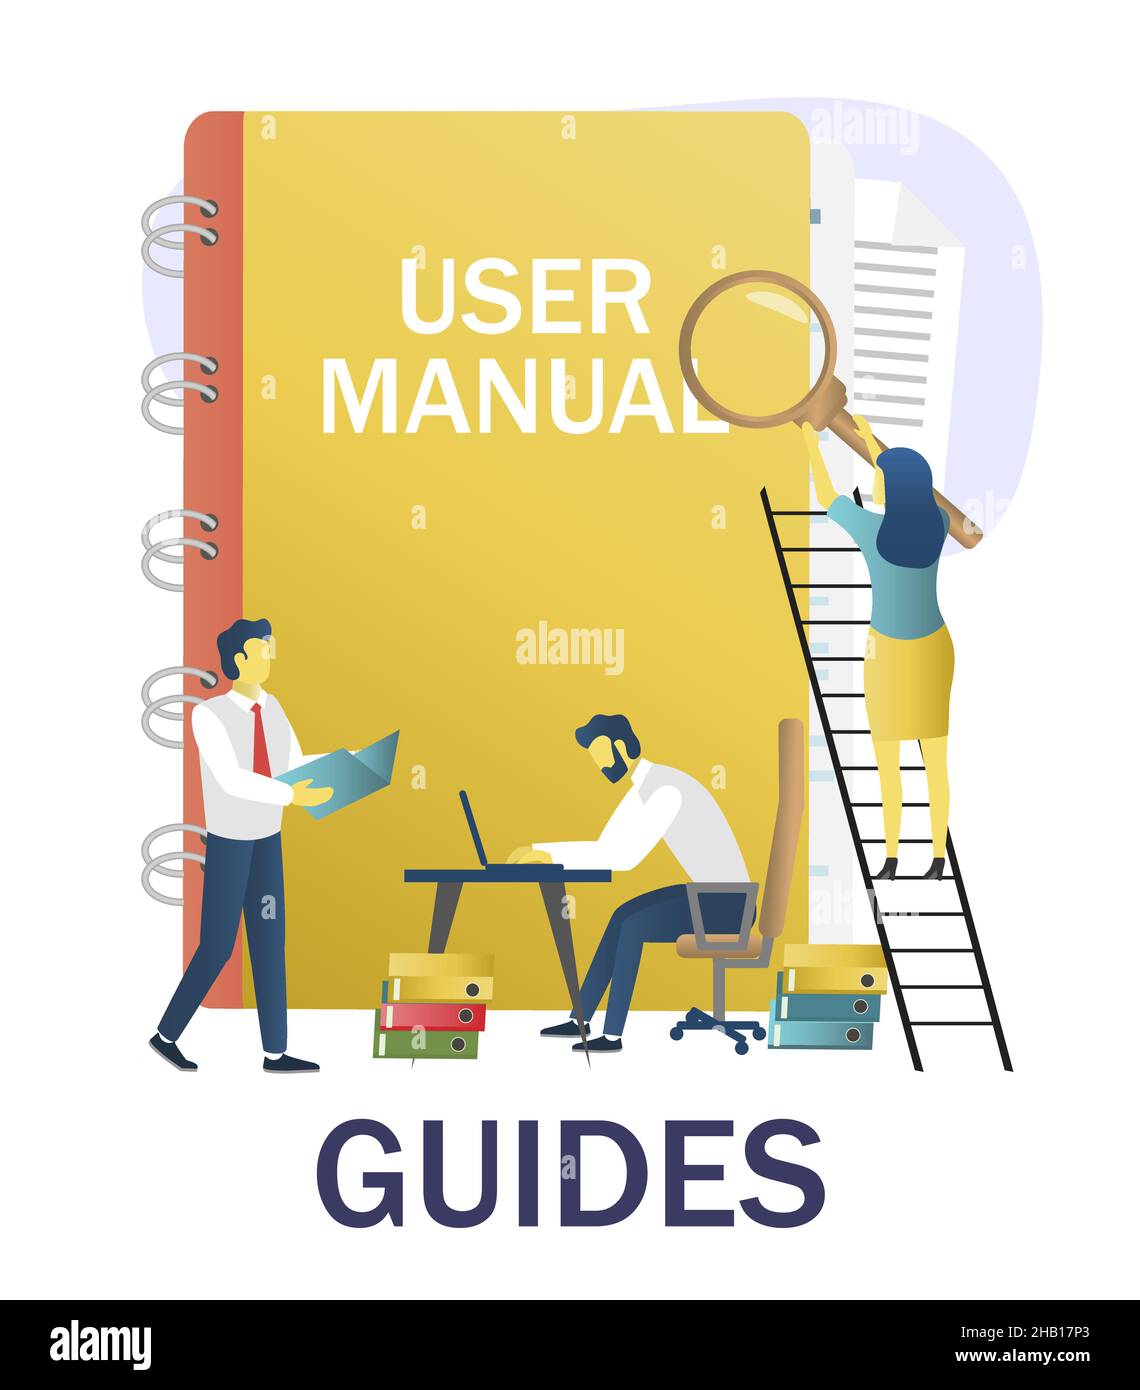 People reading guidebook, writing guidance, advices, instruction manual, vector illustration. User guide, user manual. Stock Vector